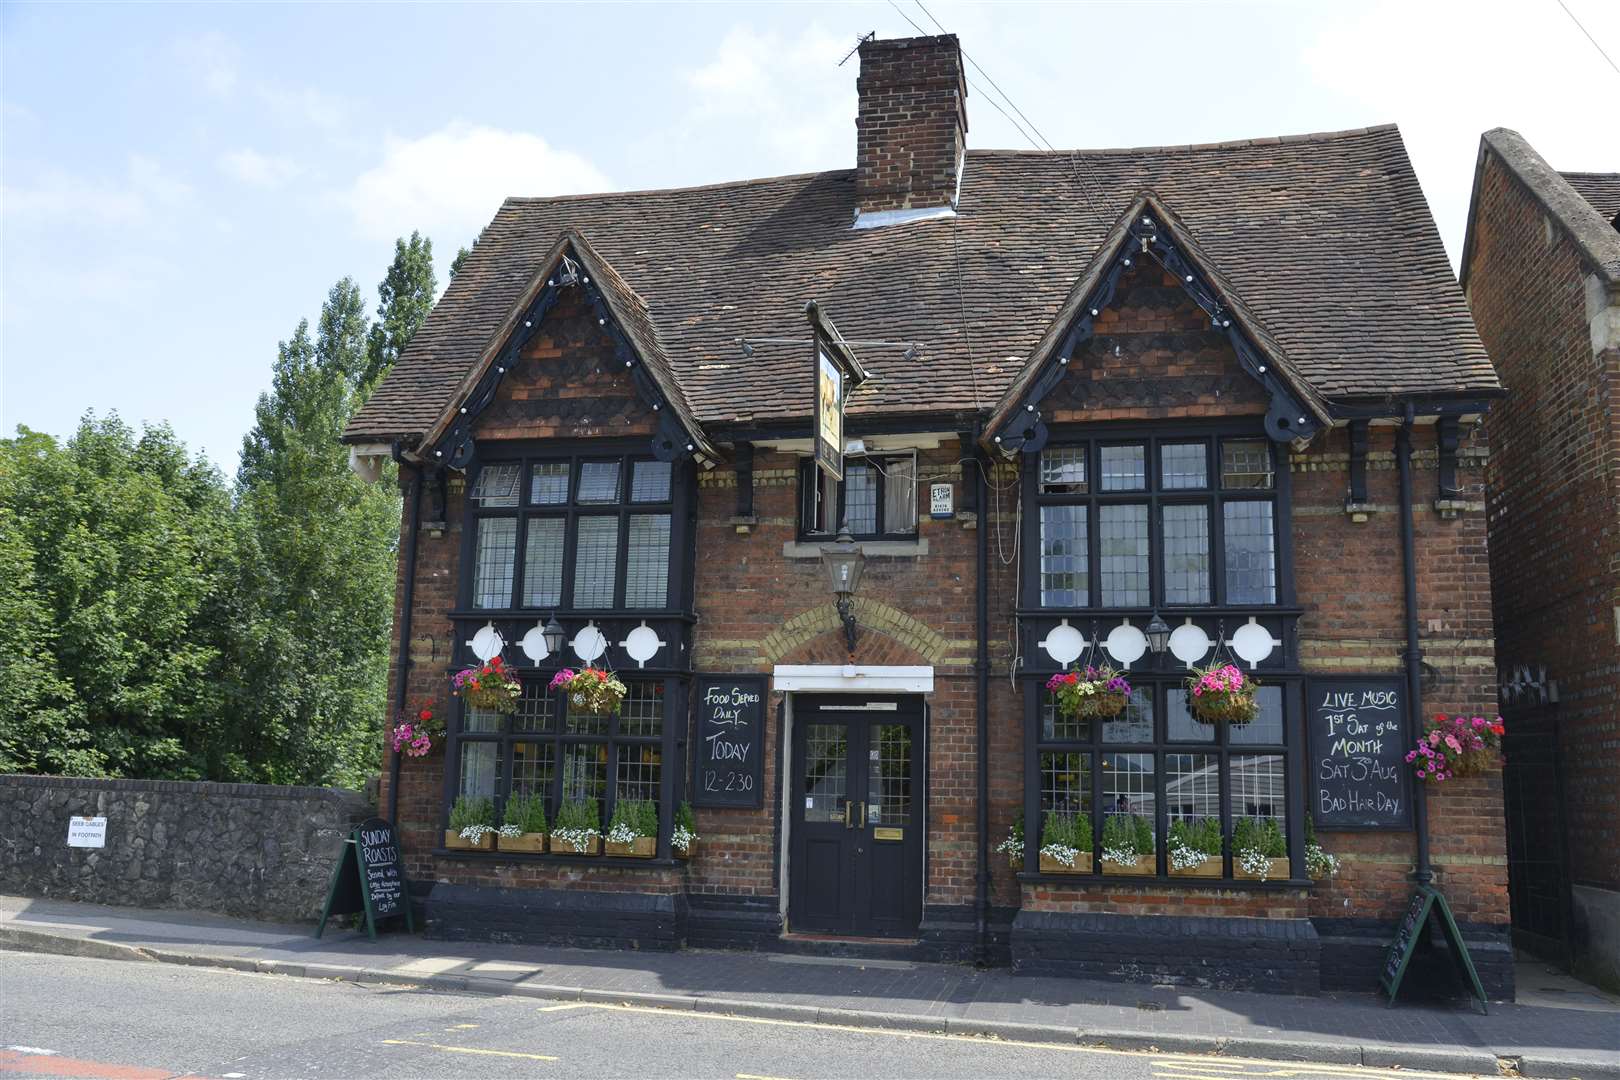 The Bull Inn is still serving pints to punters in West Malling. Picture: Martin Apps